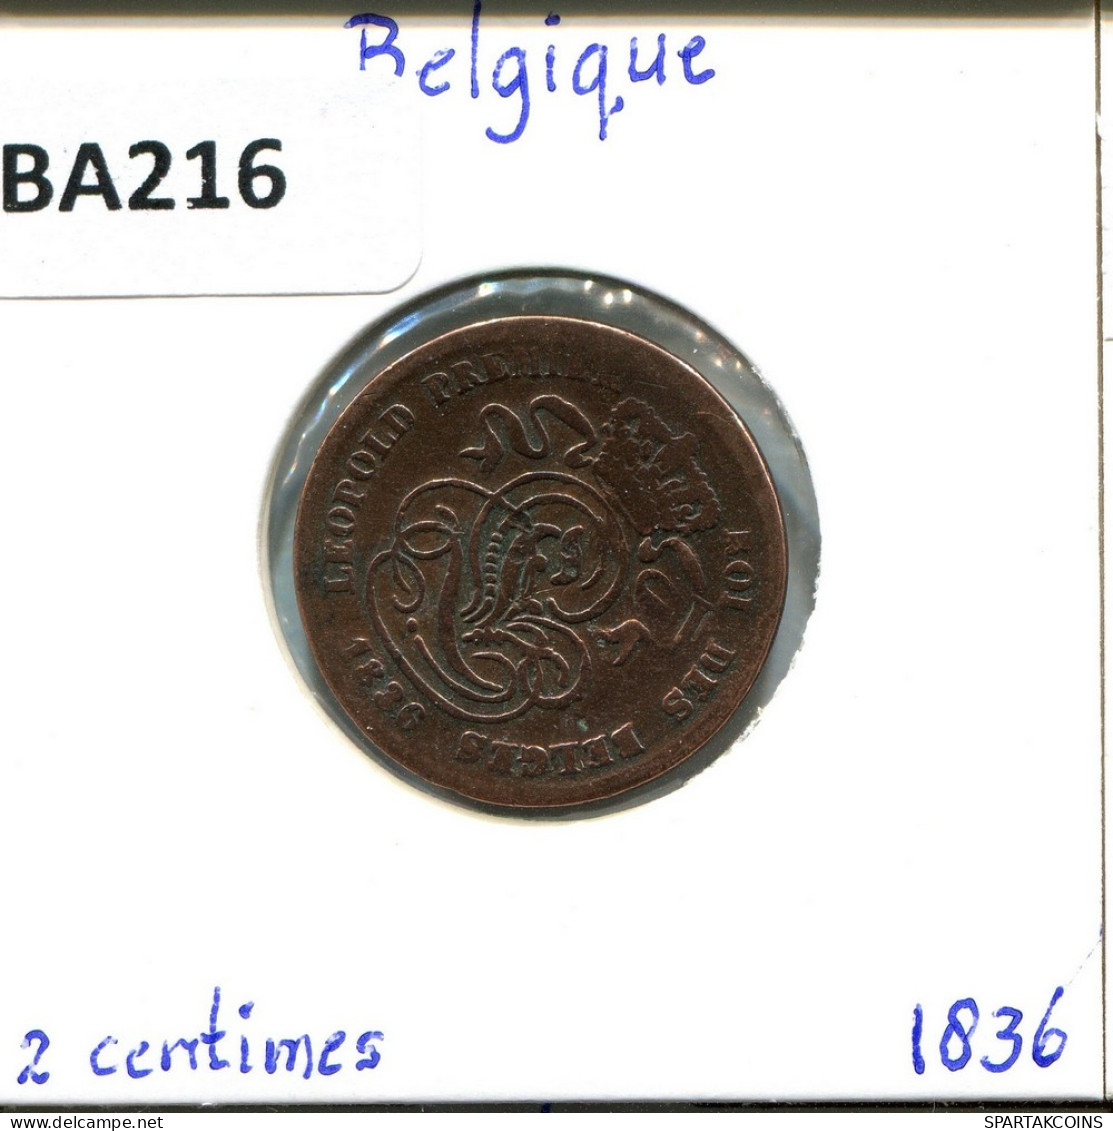 2 CENTIMES 1836 FRENCH Text BELGIUM Coin #BA216.U - 2 Cents